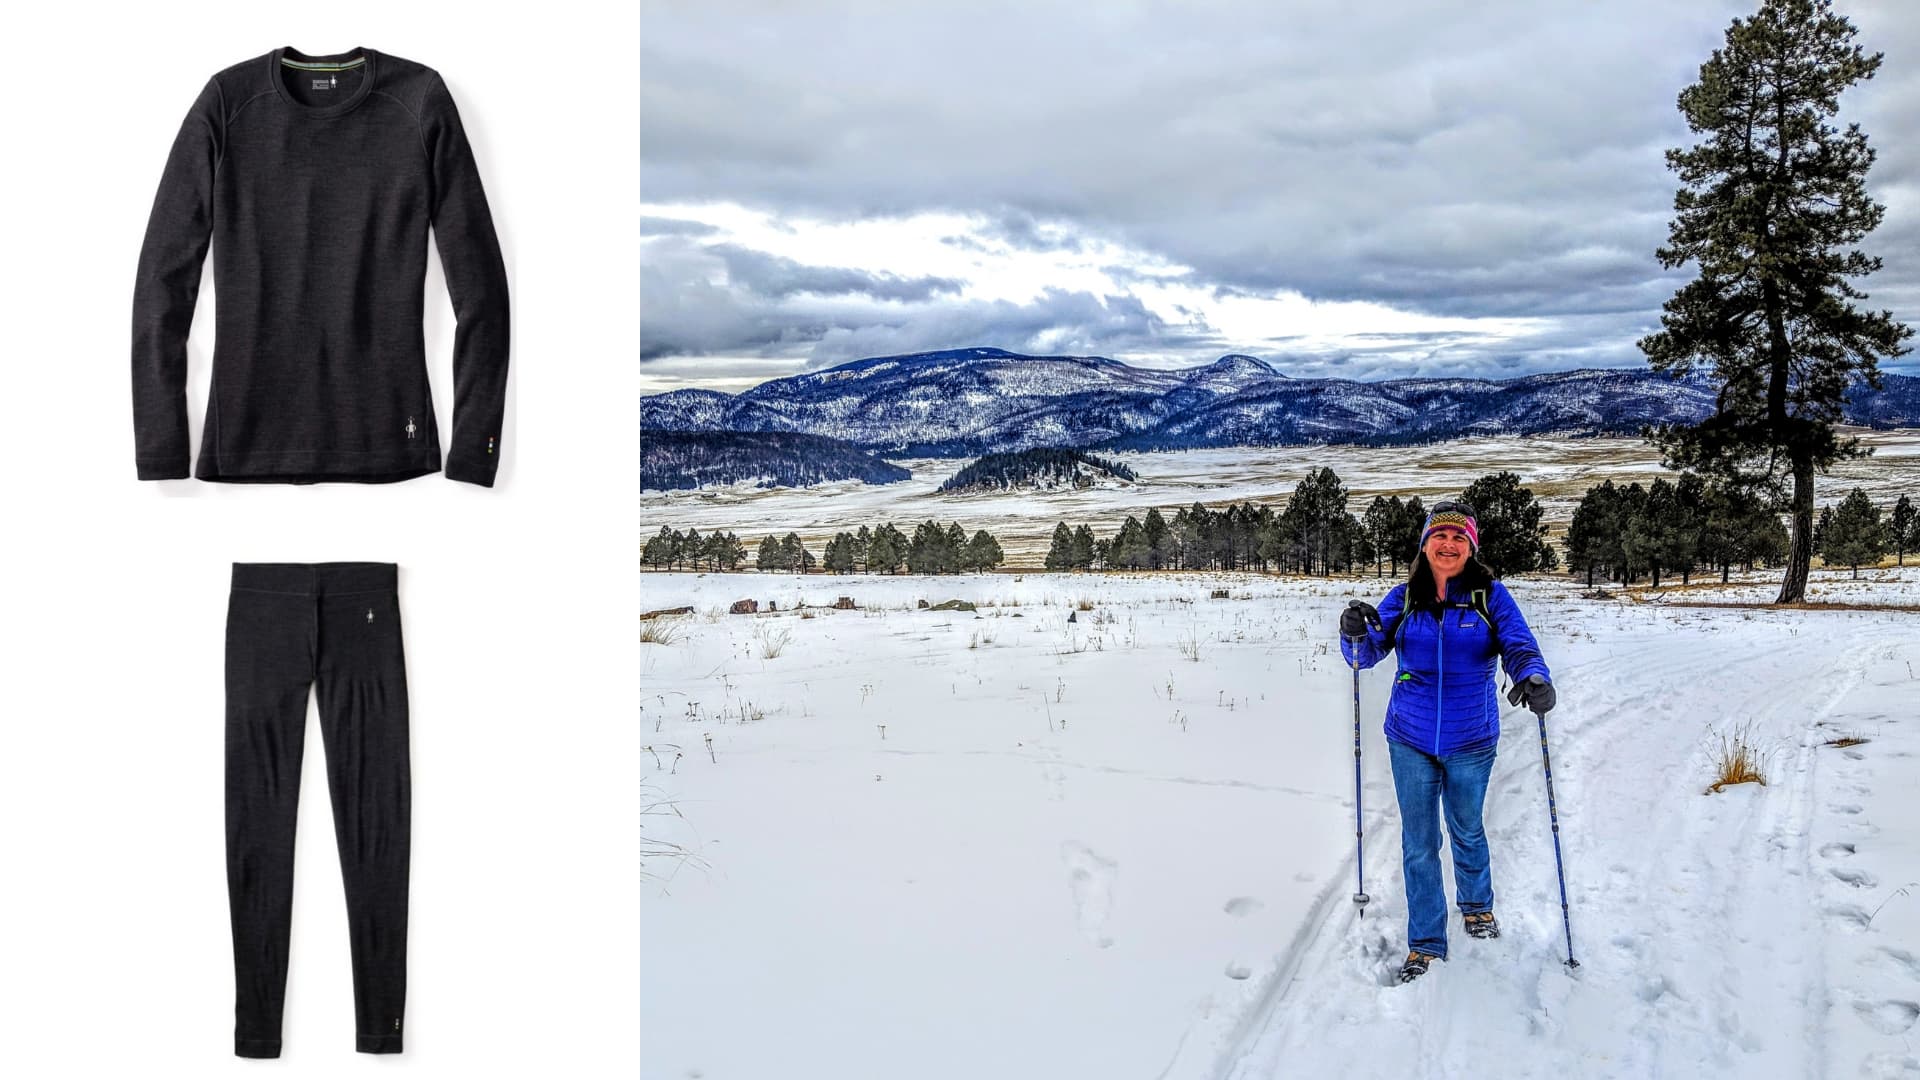 (left) charcoal gray wool base layers (right) woman in blue coat hiking through snowy winter landscape